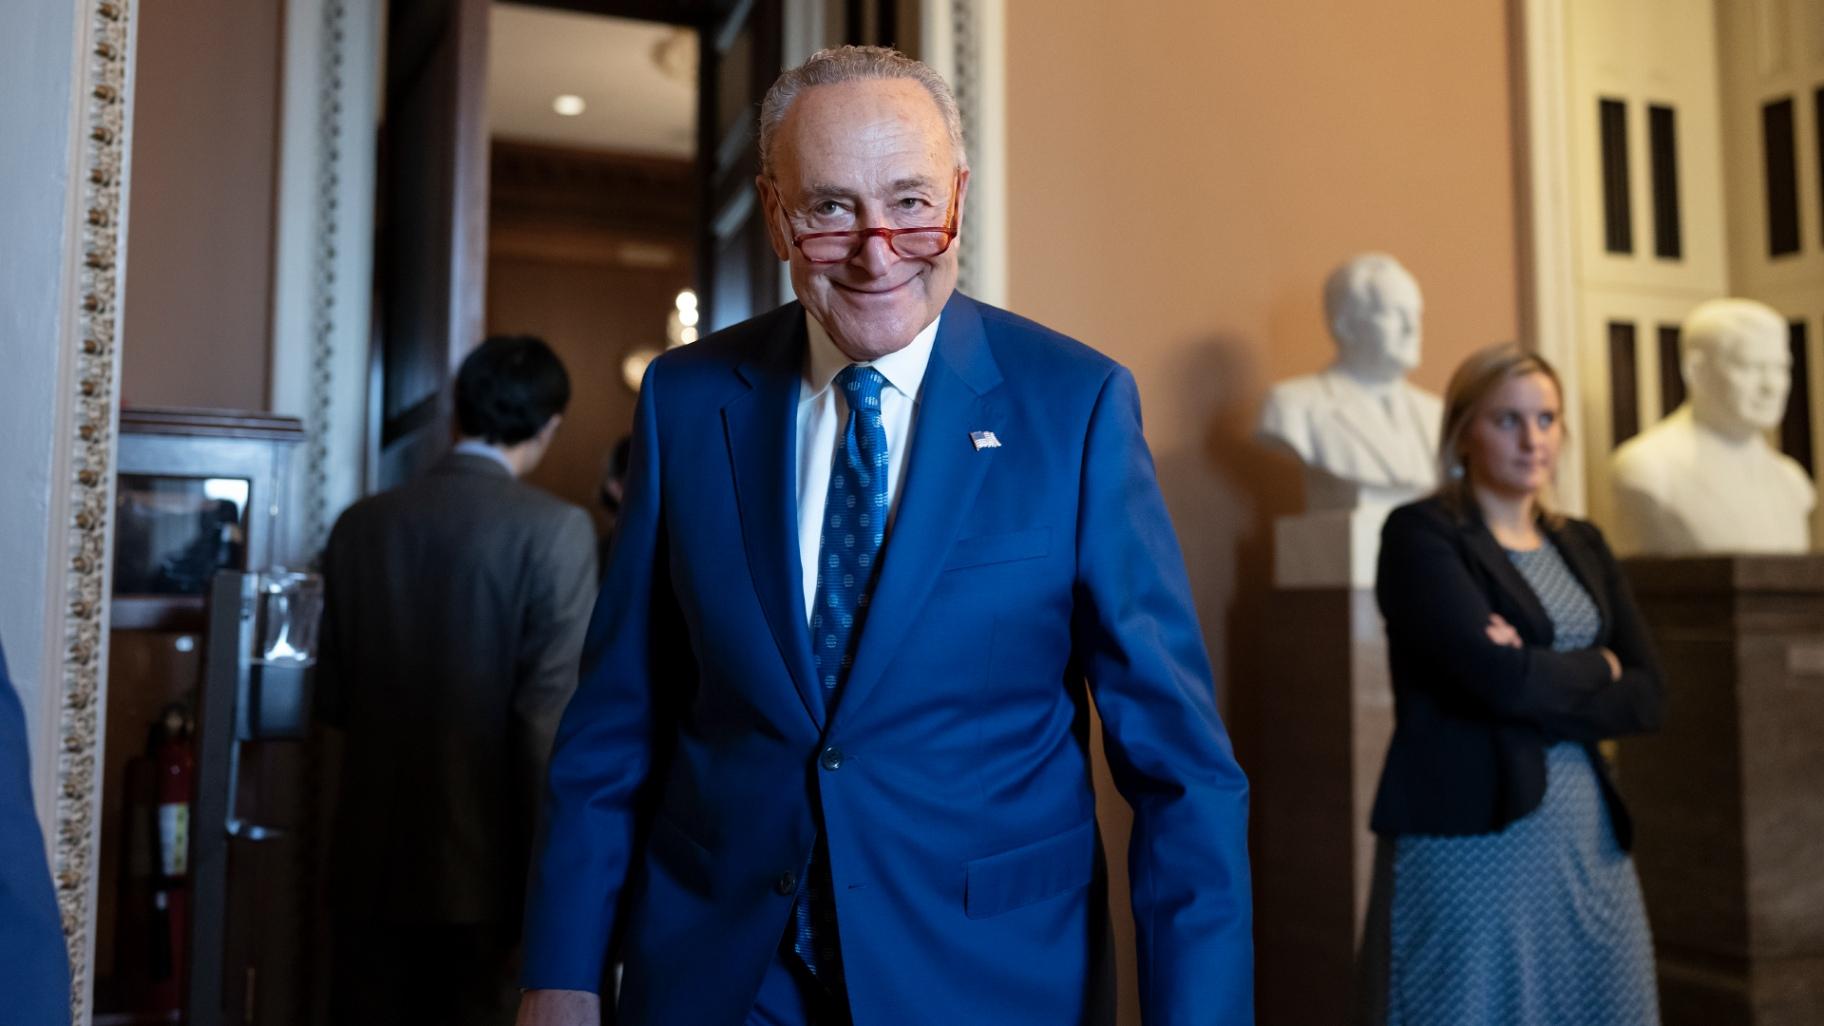 Senate Majority Leader Chuck Schumer, D-N.Y., grins as he emerges from the closed-door Senate Democratic Caucus leadership election at the Capitol in Washington, Thursday, Dec. 8, 2022. (AP Photo / J. Scott Applewhite)